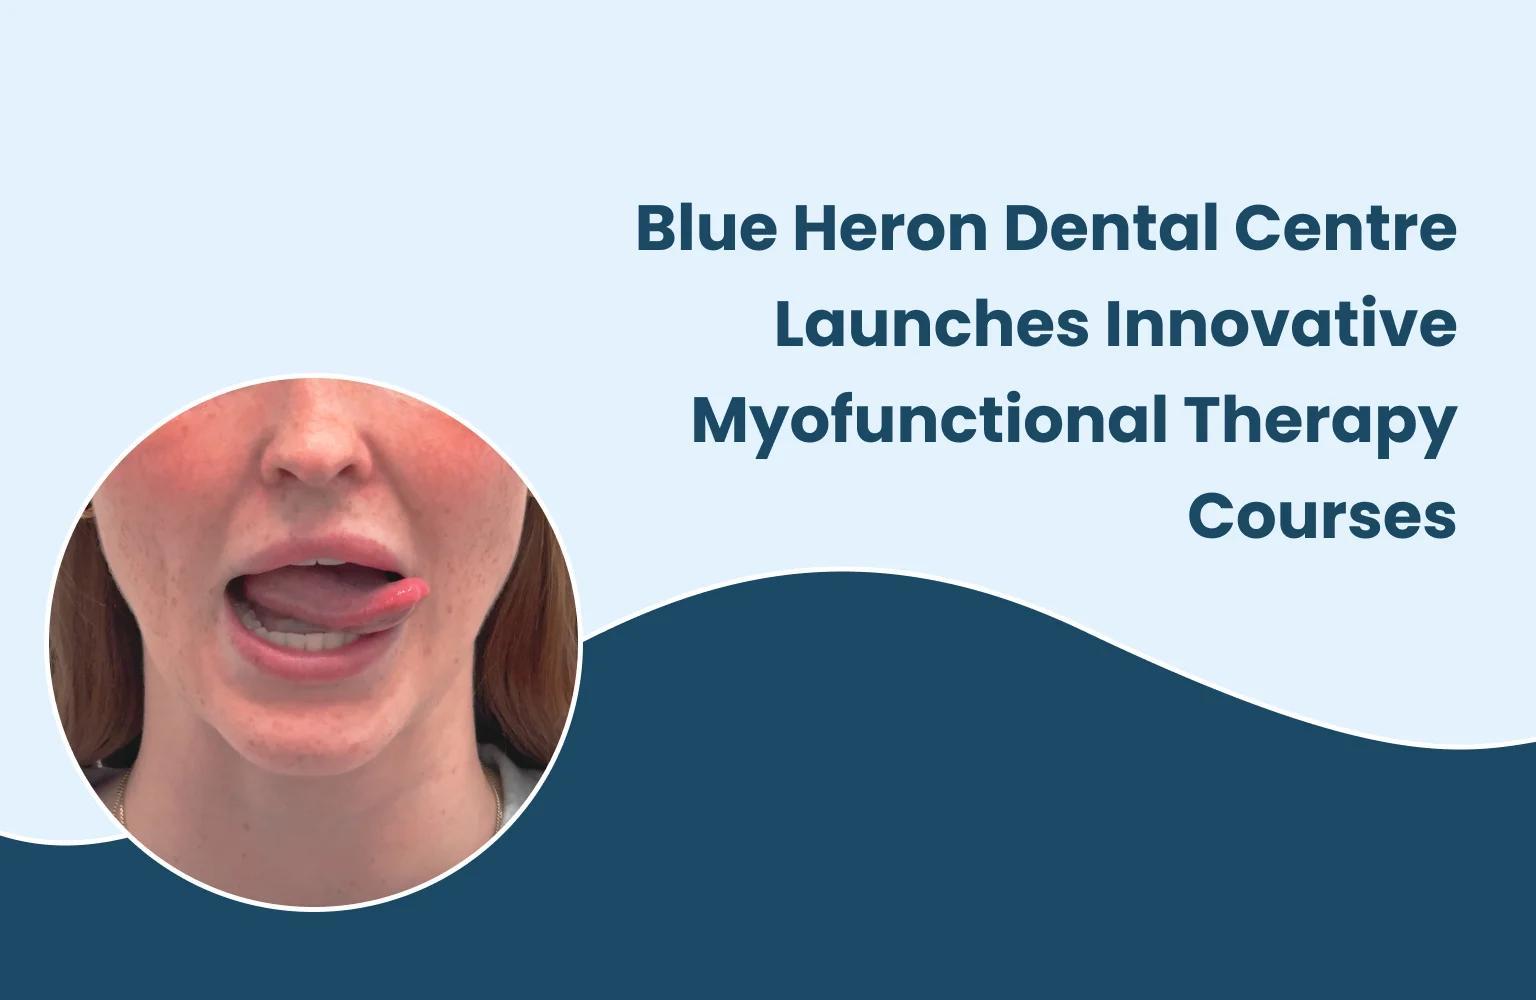 Blue Heron Dental Centre Launches Innovative Myofunctional Therapy Courses